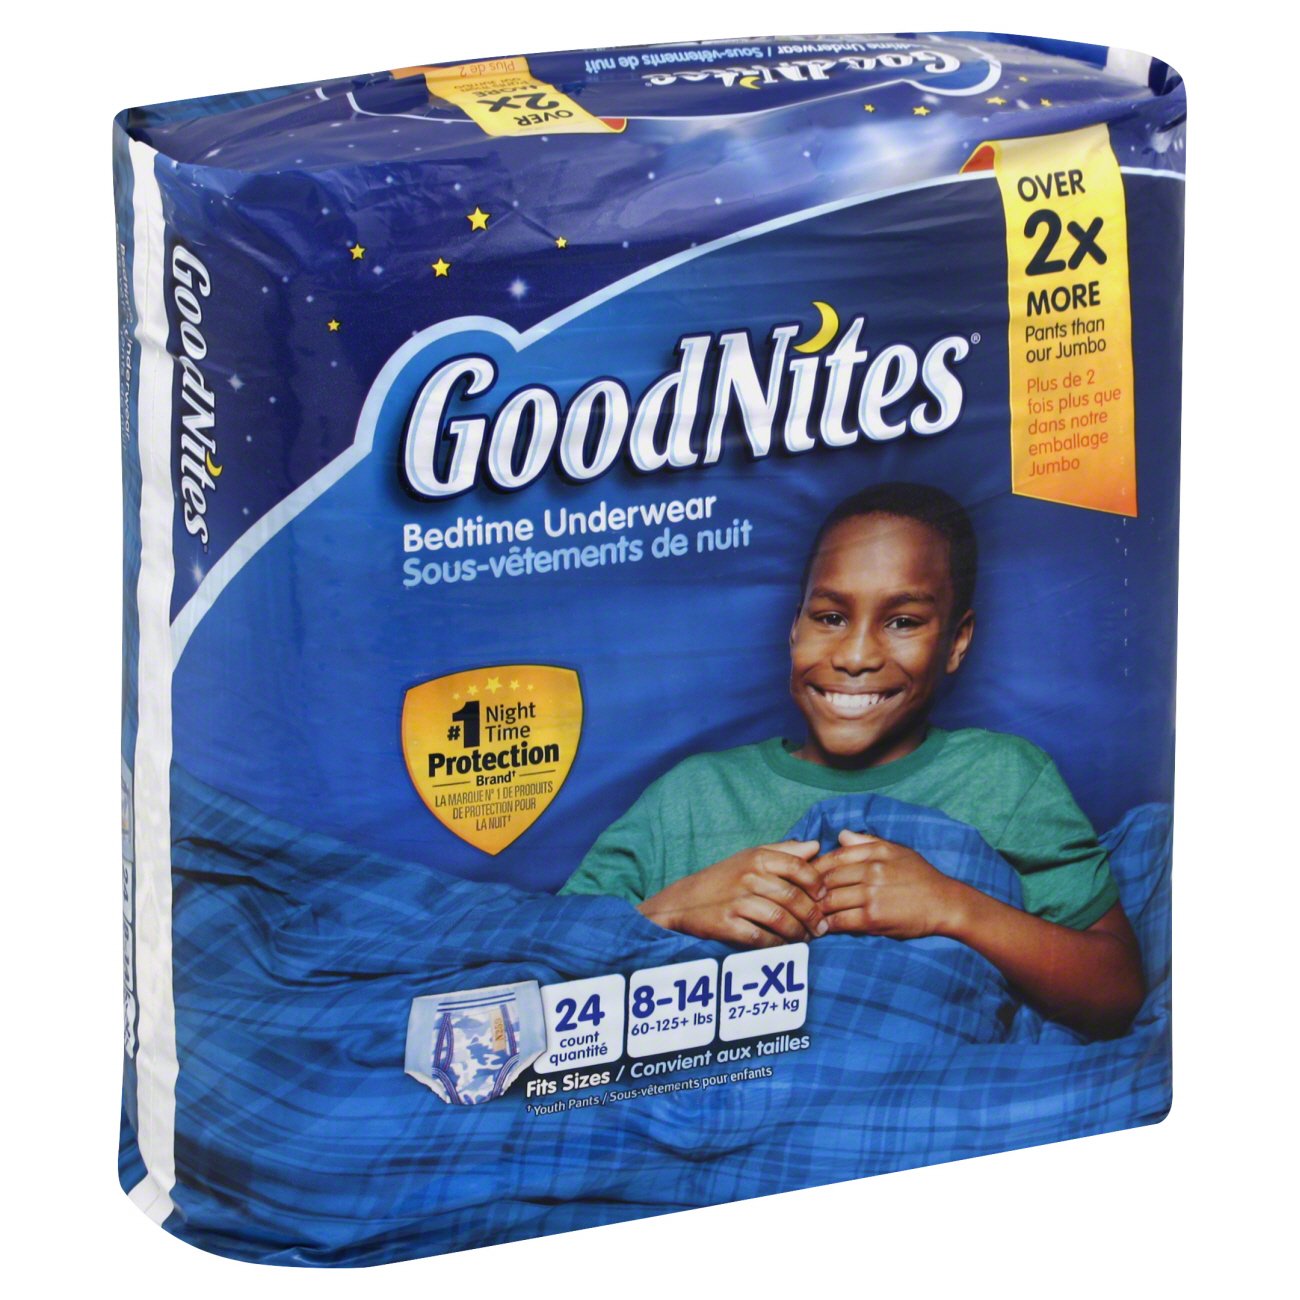 Goodnites Overnight Underwear for Girls - L - Shop Training Pants at H-E-B